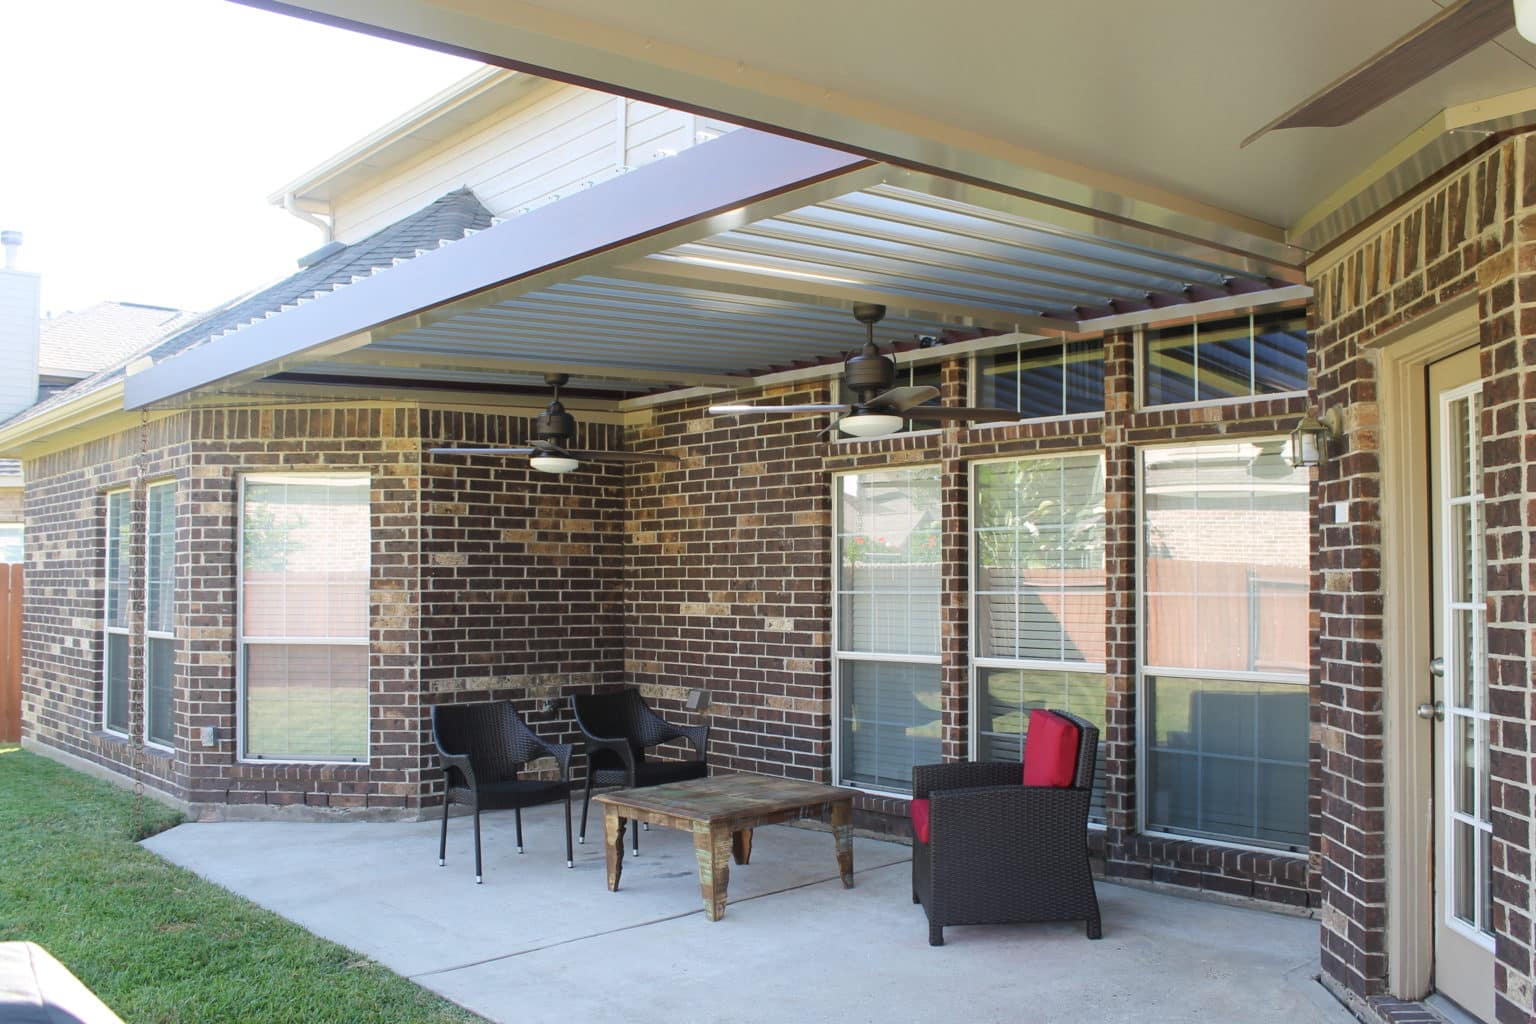 LOUVERED ROOF​